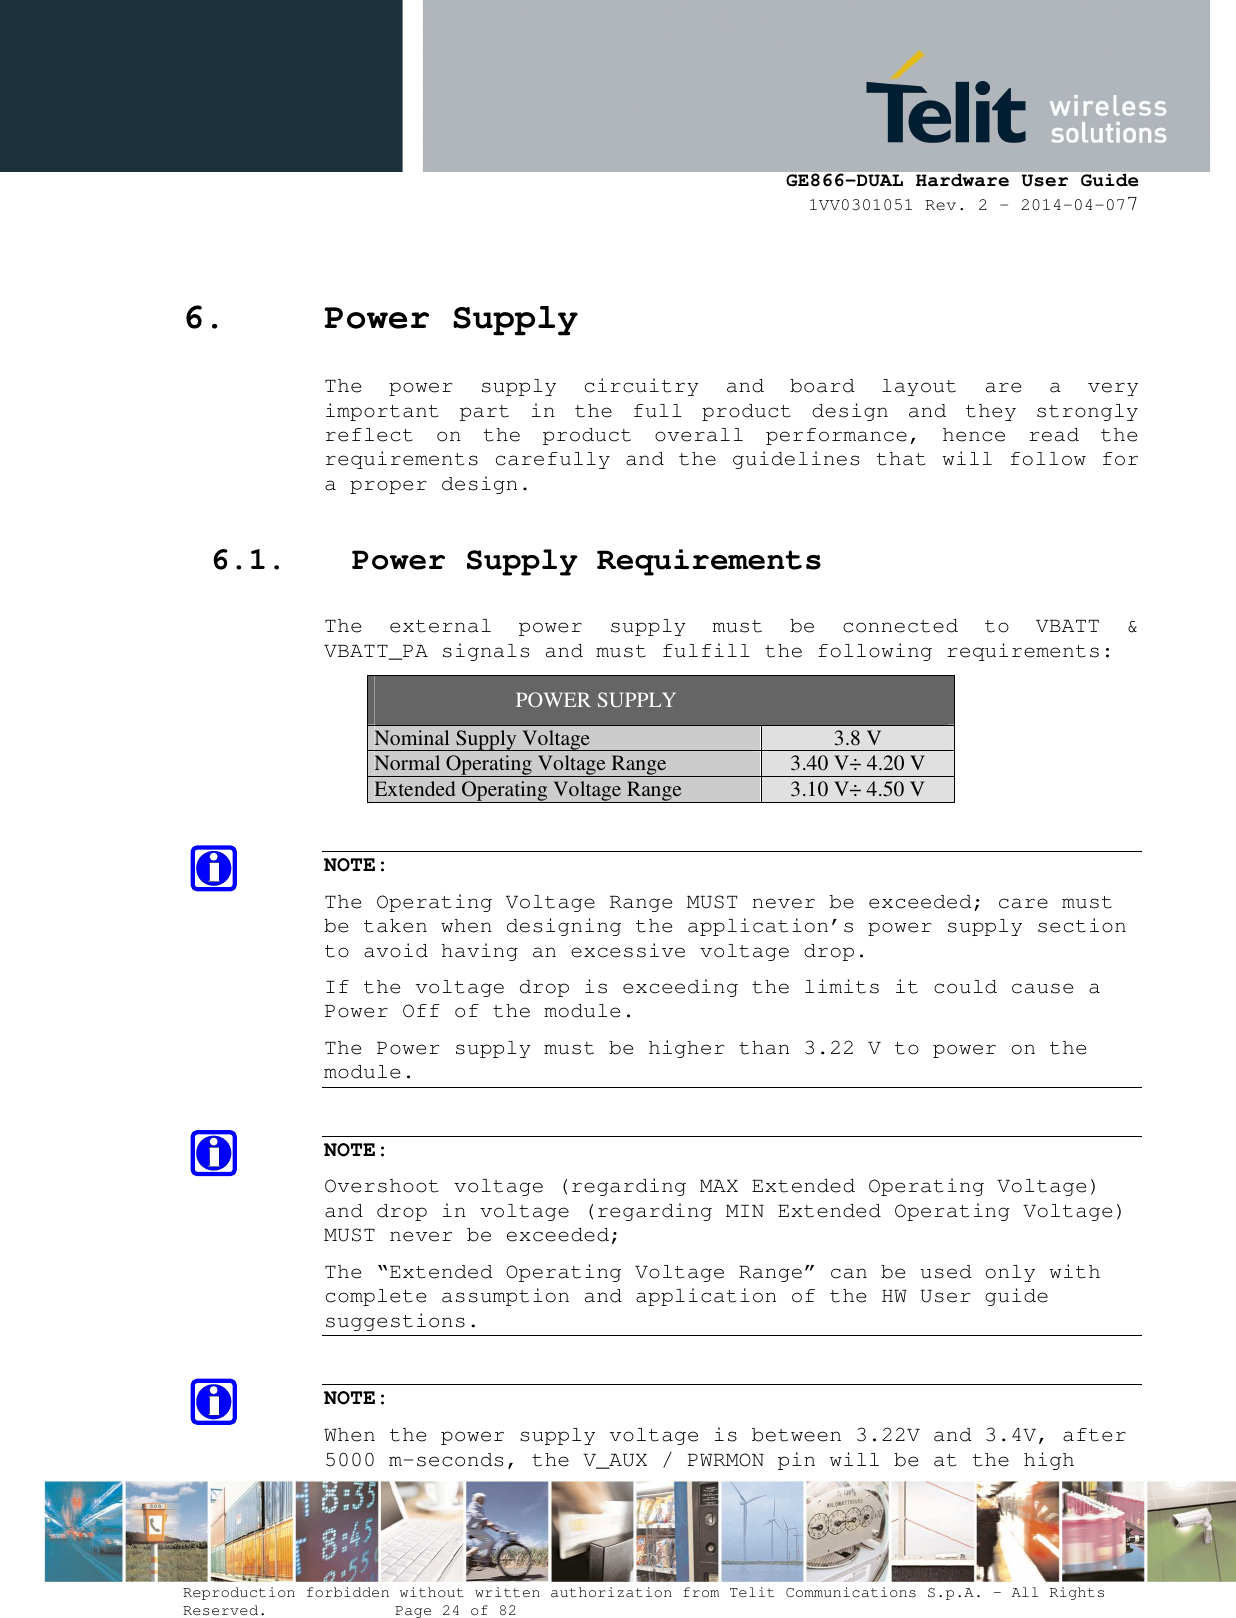      GE866-DUAL Hardware User Guide 1VV0301051 Rev. 2 – 2014-04-077  Reproduction forbidden without written authorization from Telit Communications S.p.A. - All Rights Reserved.    Page 24 of 82 Mod. 0805 2011-07 Rev.2 6. Power Supply The  power  supply  circuitry  and  board  layout  are  a  very important  part  in  the  full  product  design  and  they  strongly reflect  on  the  product  overall  performance,  hence  read  the requirements carefully and the guidelines that will follow for a proper design. 6.1. Power Supply Requirements The  external  power  supply  must  be  connected  to  VBATT  &amp; VBATT_PA signals and must fulfill the following requirements: POWER SUPPLY Nominal Supply Voltage 3.8 V Normal Operating Voltage Range 3.40 V÷ 4.20 V Extended Operating Voltage Range 3.10 V÷ 4.50 V  NOTE: The Operating Voltage Range MUST never be exceeded; care must be taken when designing the application’s power supply section to avoid having an excessive voltage drop.  If the voltage drop is exceeding the limits it could cause a Power Off of the module. The Power supply must be higher than 3.22 V to power on the module.  NOTE: Overshoot voltage (regarding MAX Extended Operating Voltage) and drop in voltage (regarding MIN Extended Operating Voltage) MUST never be exceeded;  The “Extended Operating Voltage Range” can be used only with complete assumption and application of the HW User guide suggestions.  NOTE: When the power supply voltage is between 3.22V and 3.4V, after 5000 m-seconds, the V_AUX / PWRMON pin will be at the high 